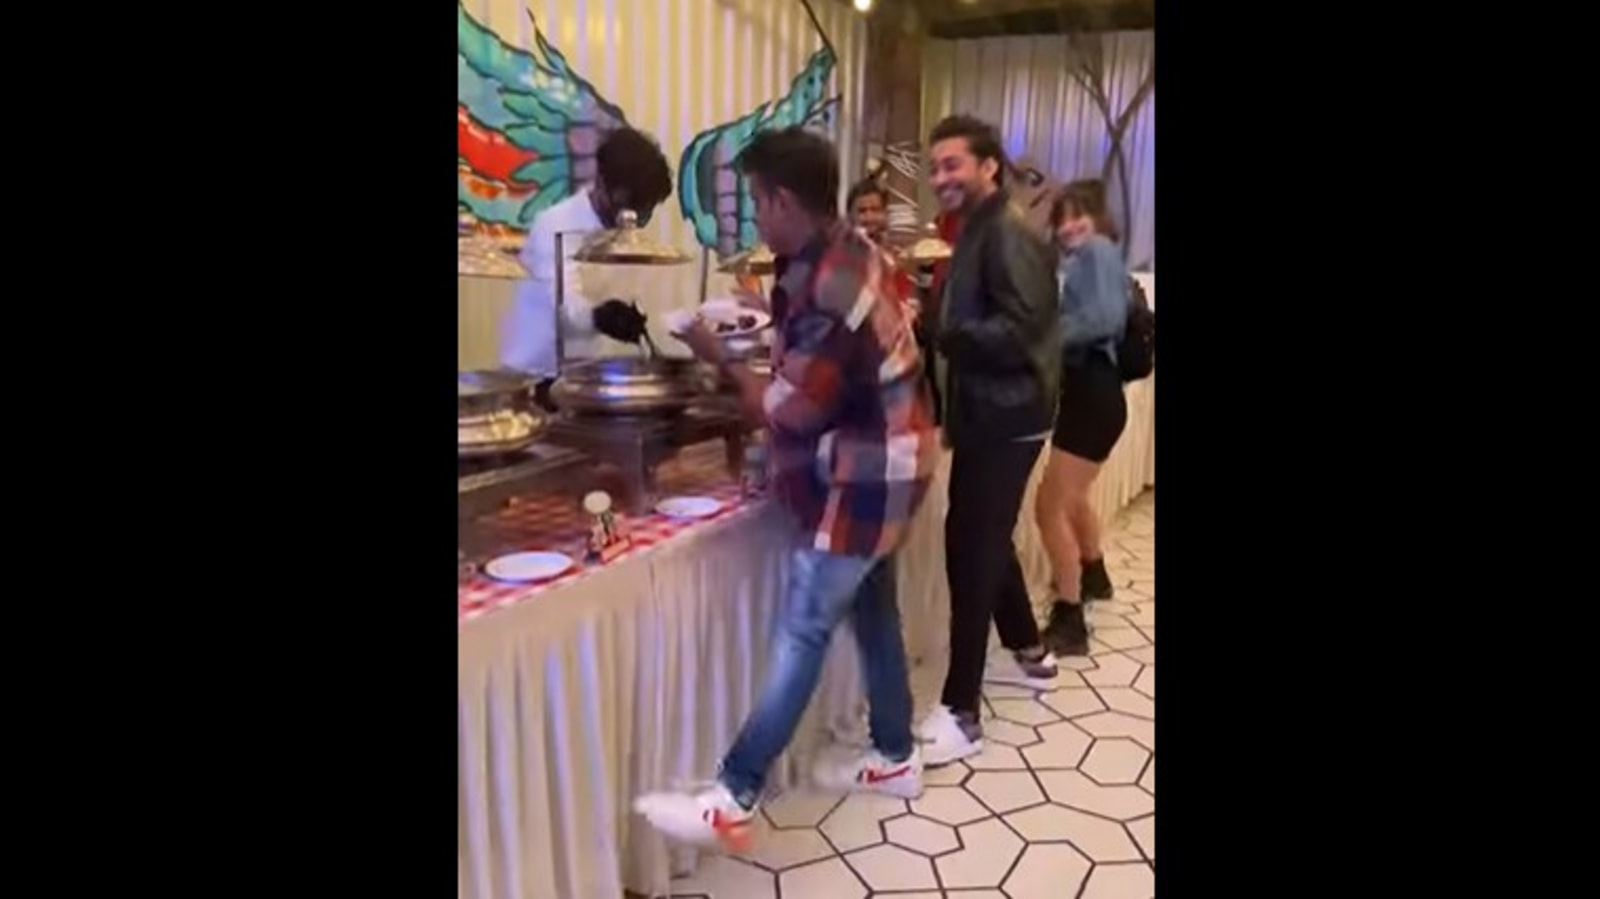 Dancers do Allu Arjun’s Srivalli hook step as they get food at a buffet. Watch | Trending